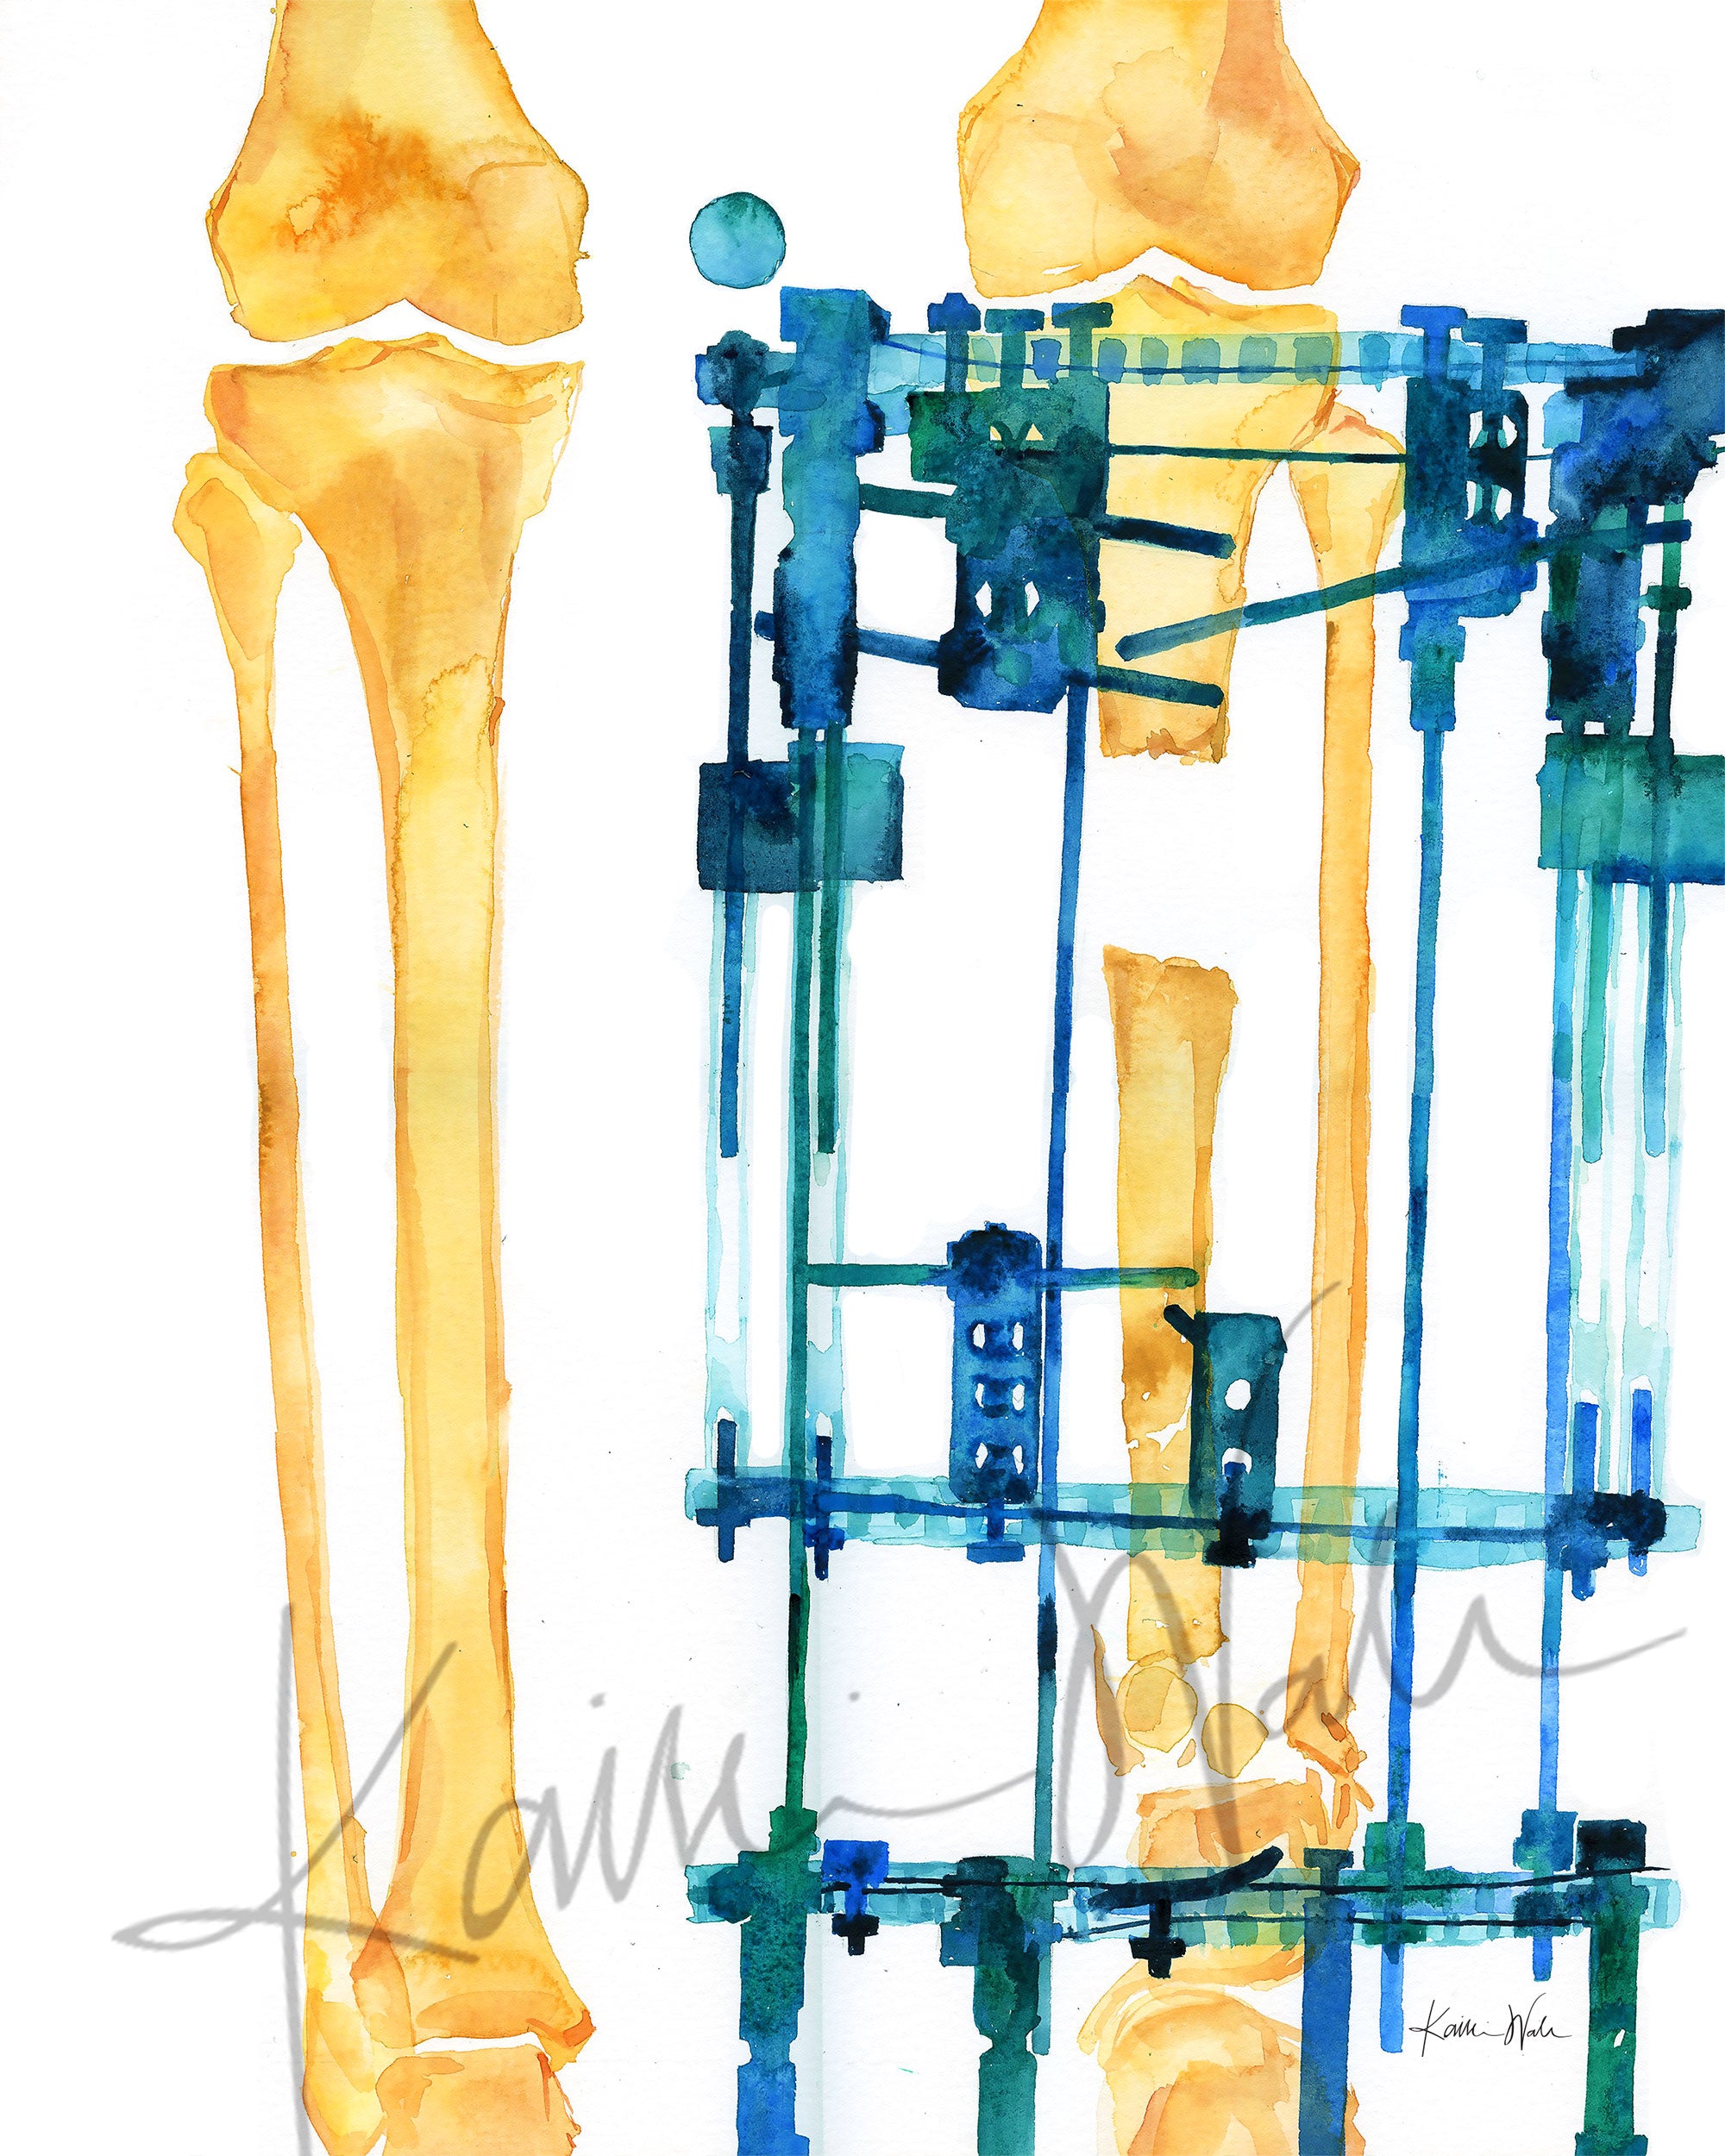 Unframed watercolor painting of a post orthopedic surgery x-ray.